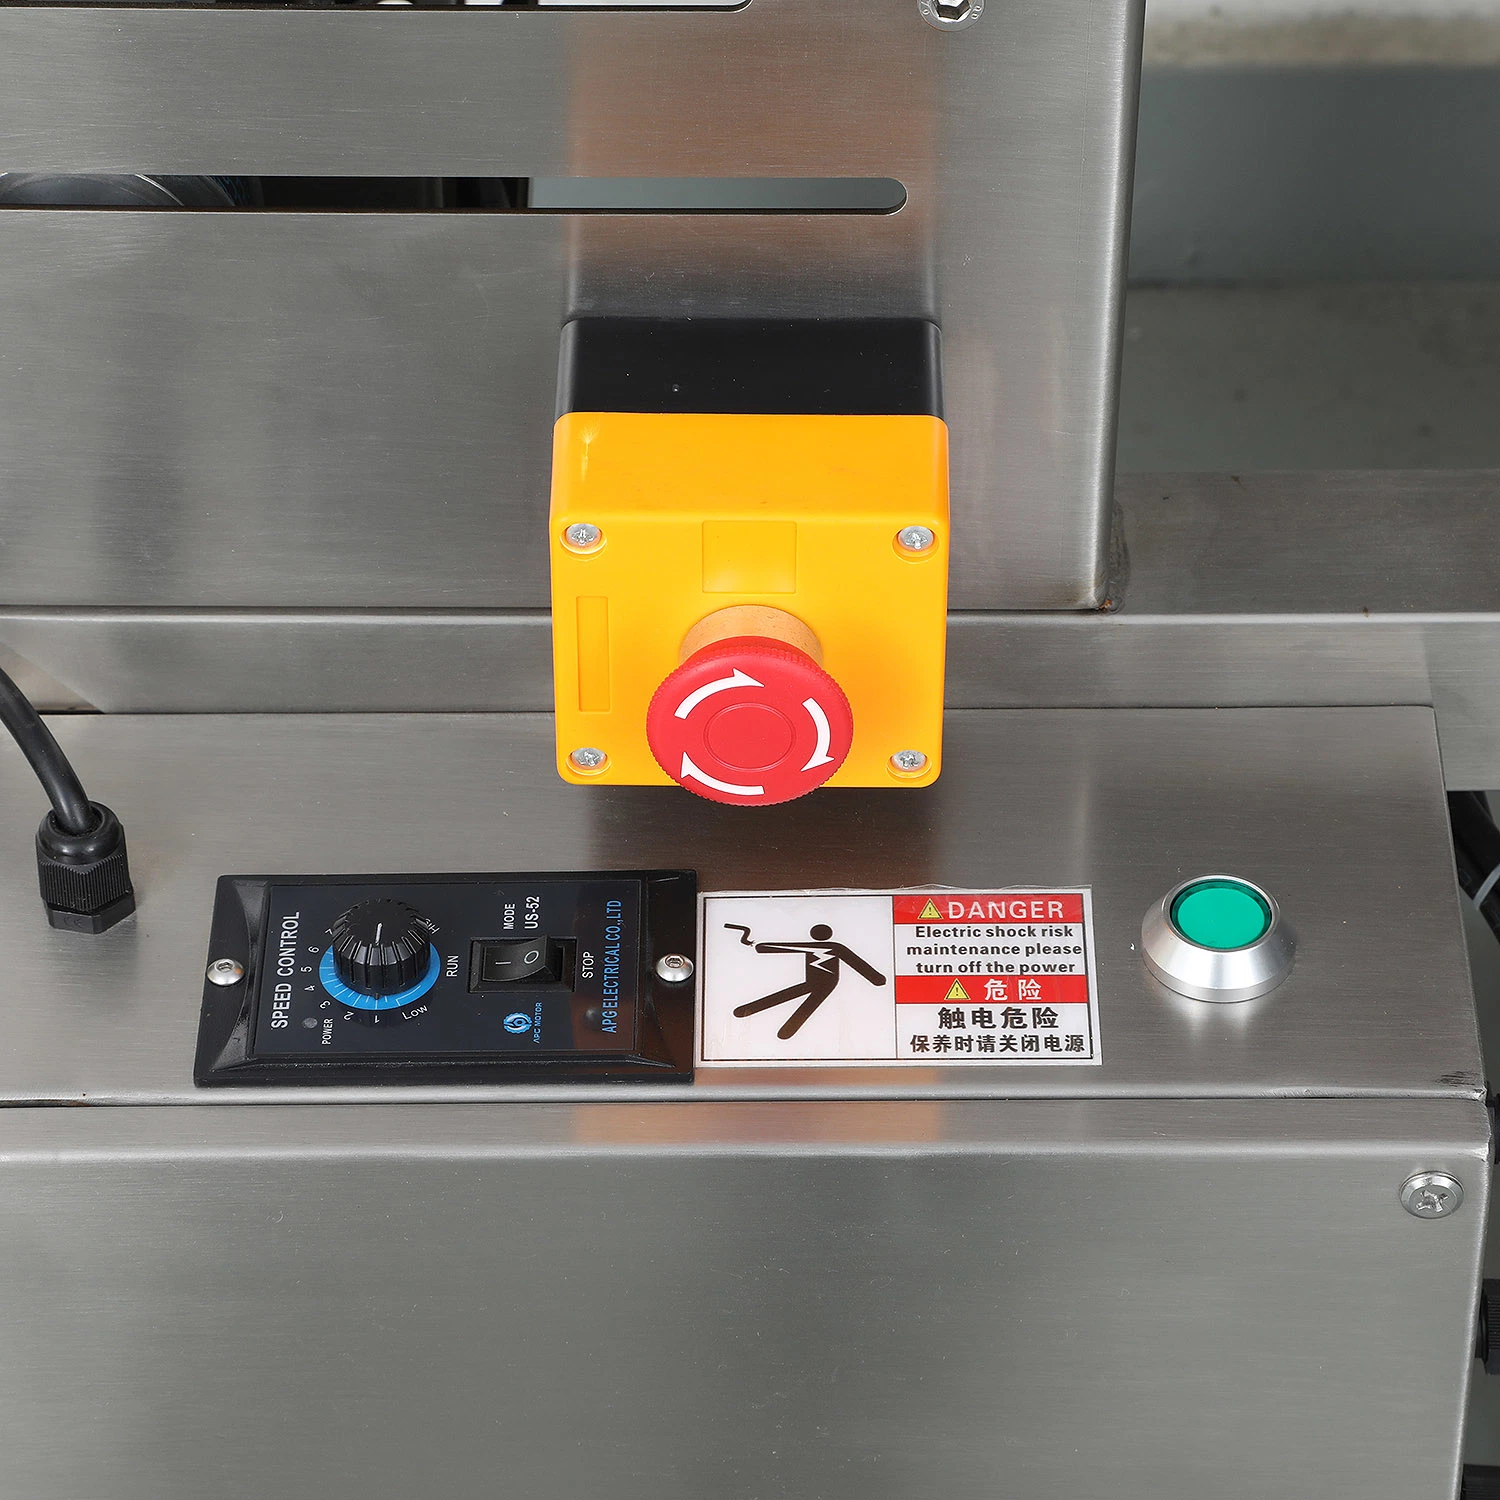 Metal Detection Equipment/Tunnel Metal Detector for Food Processing Industry